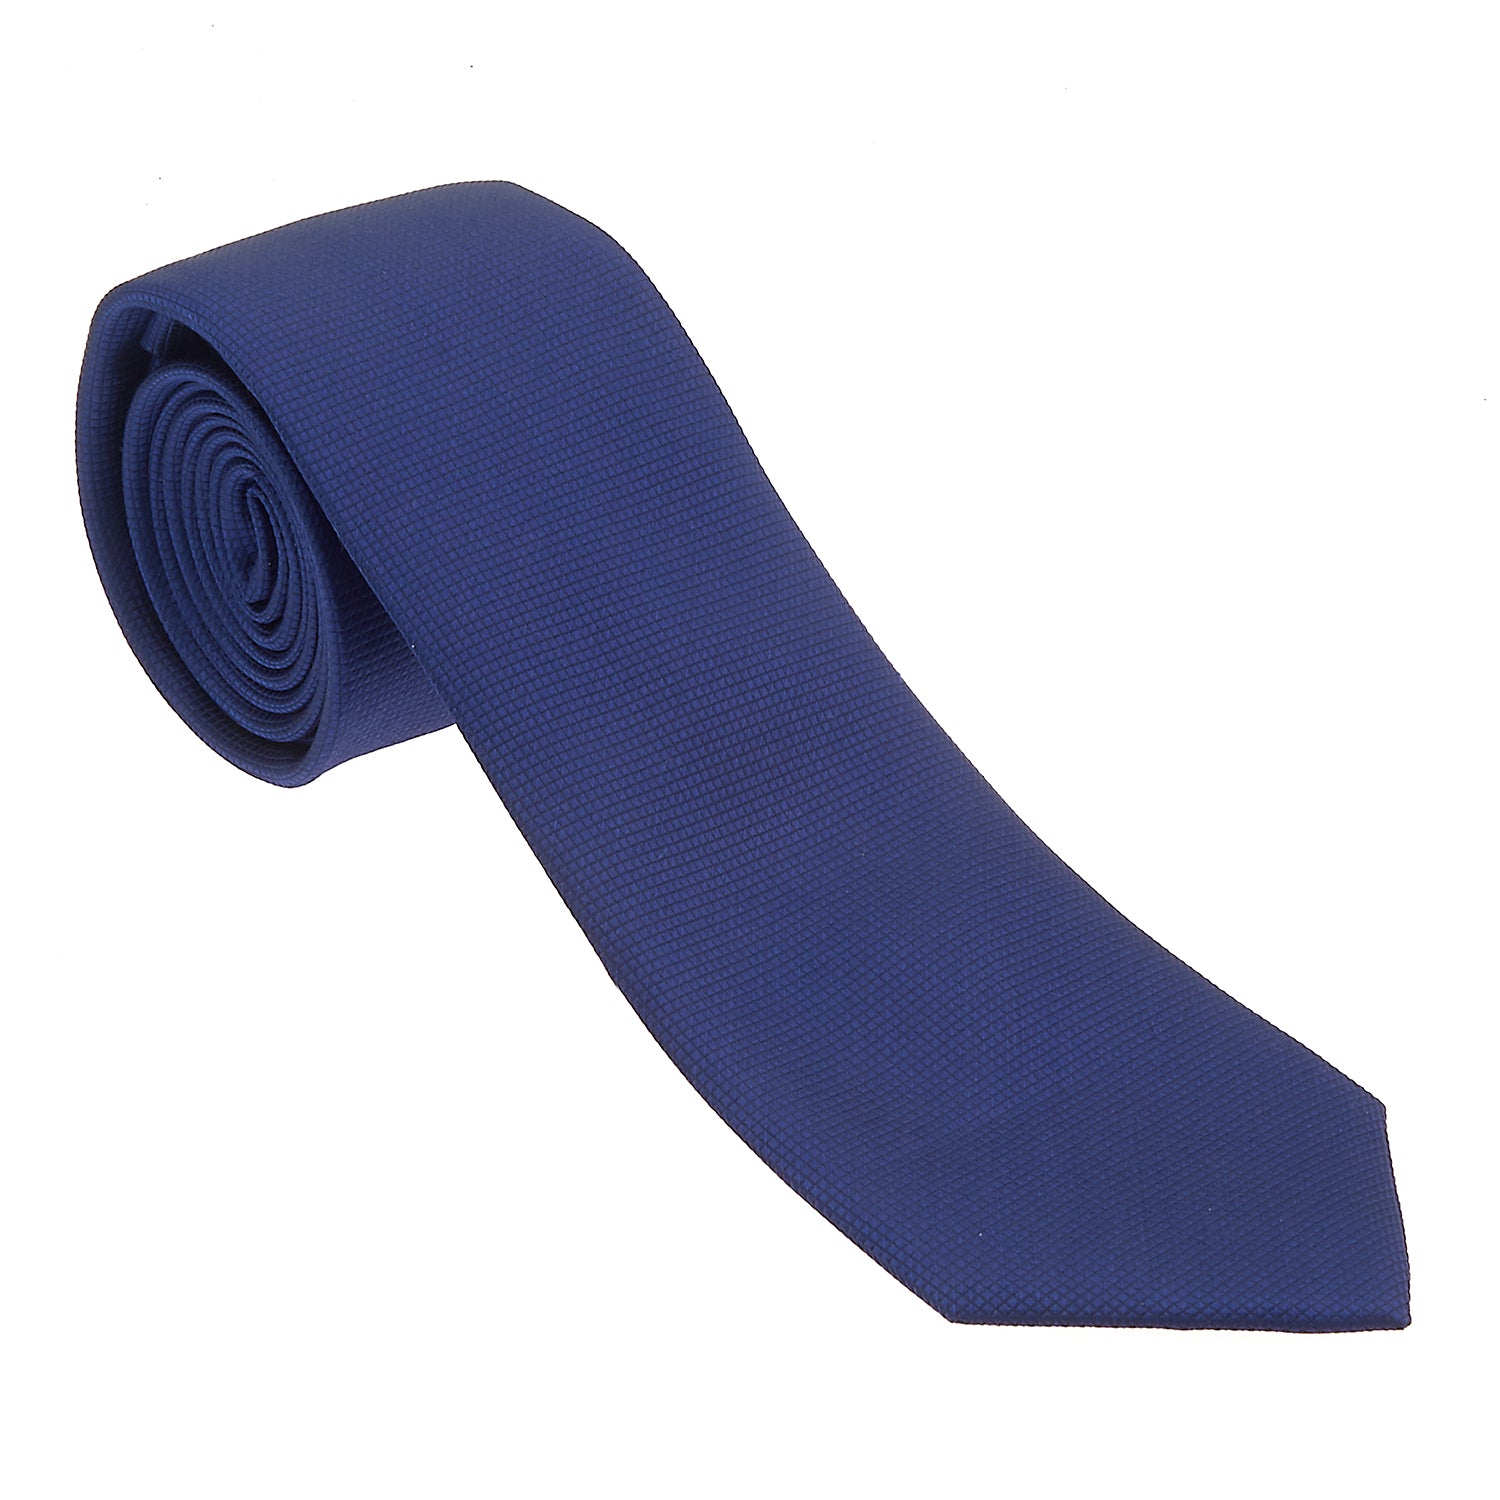 royal blue tie with suit